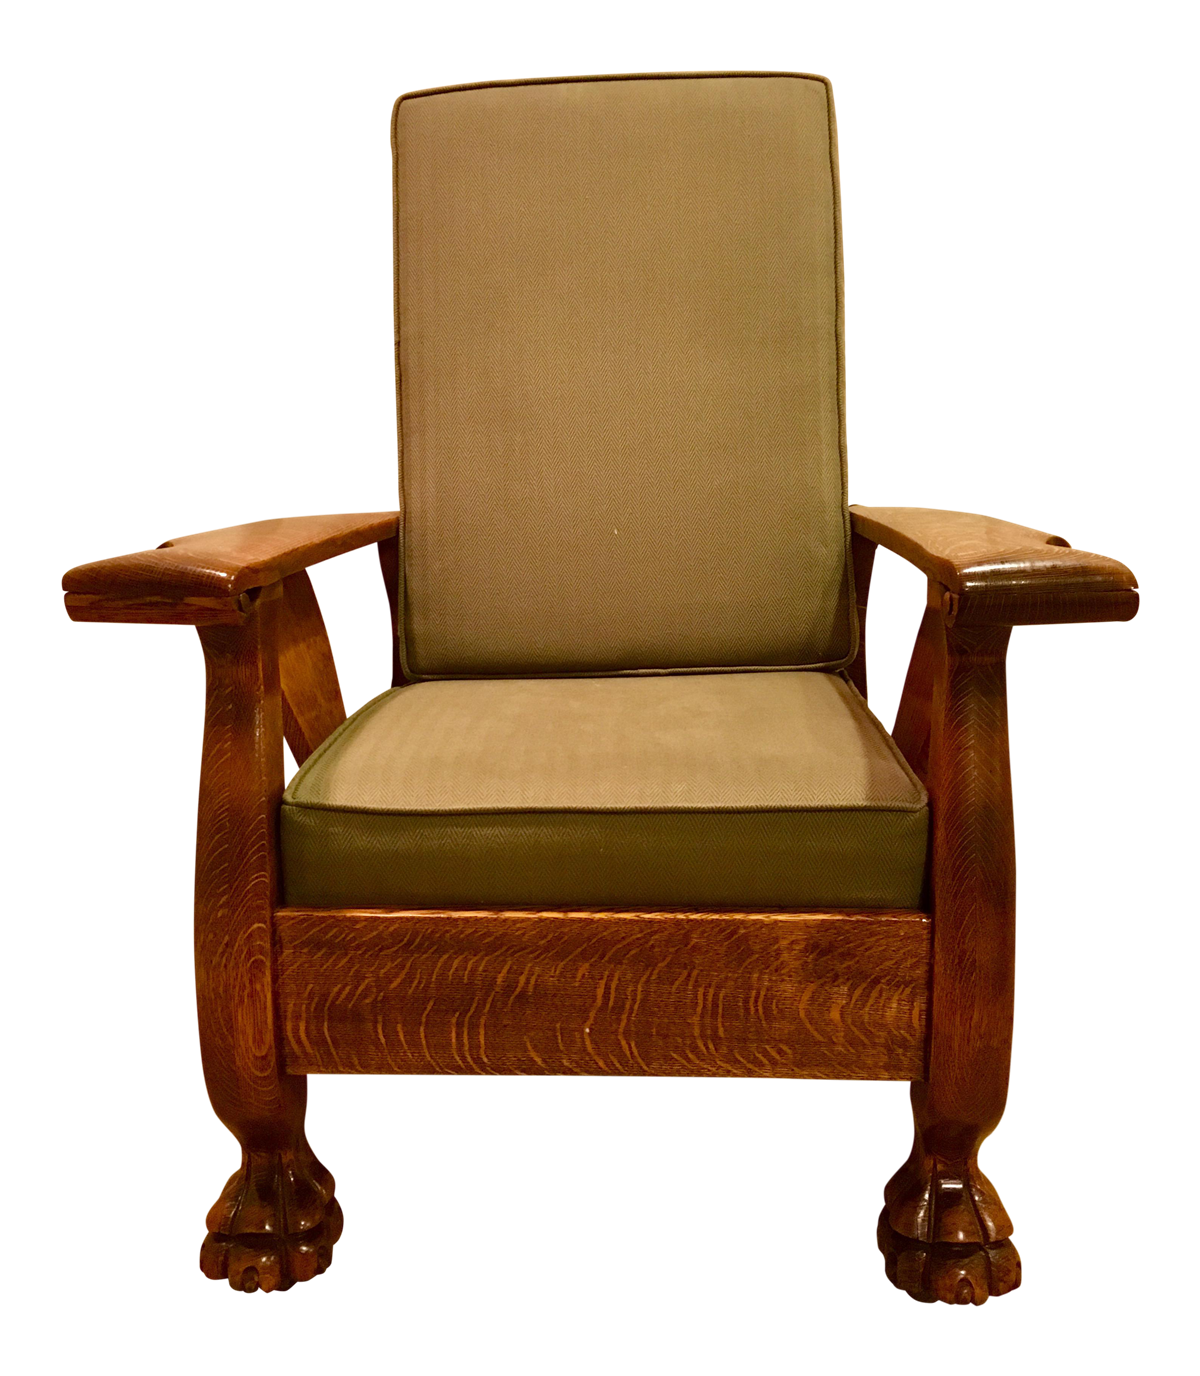 Morris Chair Image Free Photo PNG PNG Image